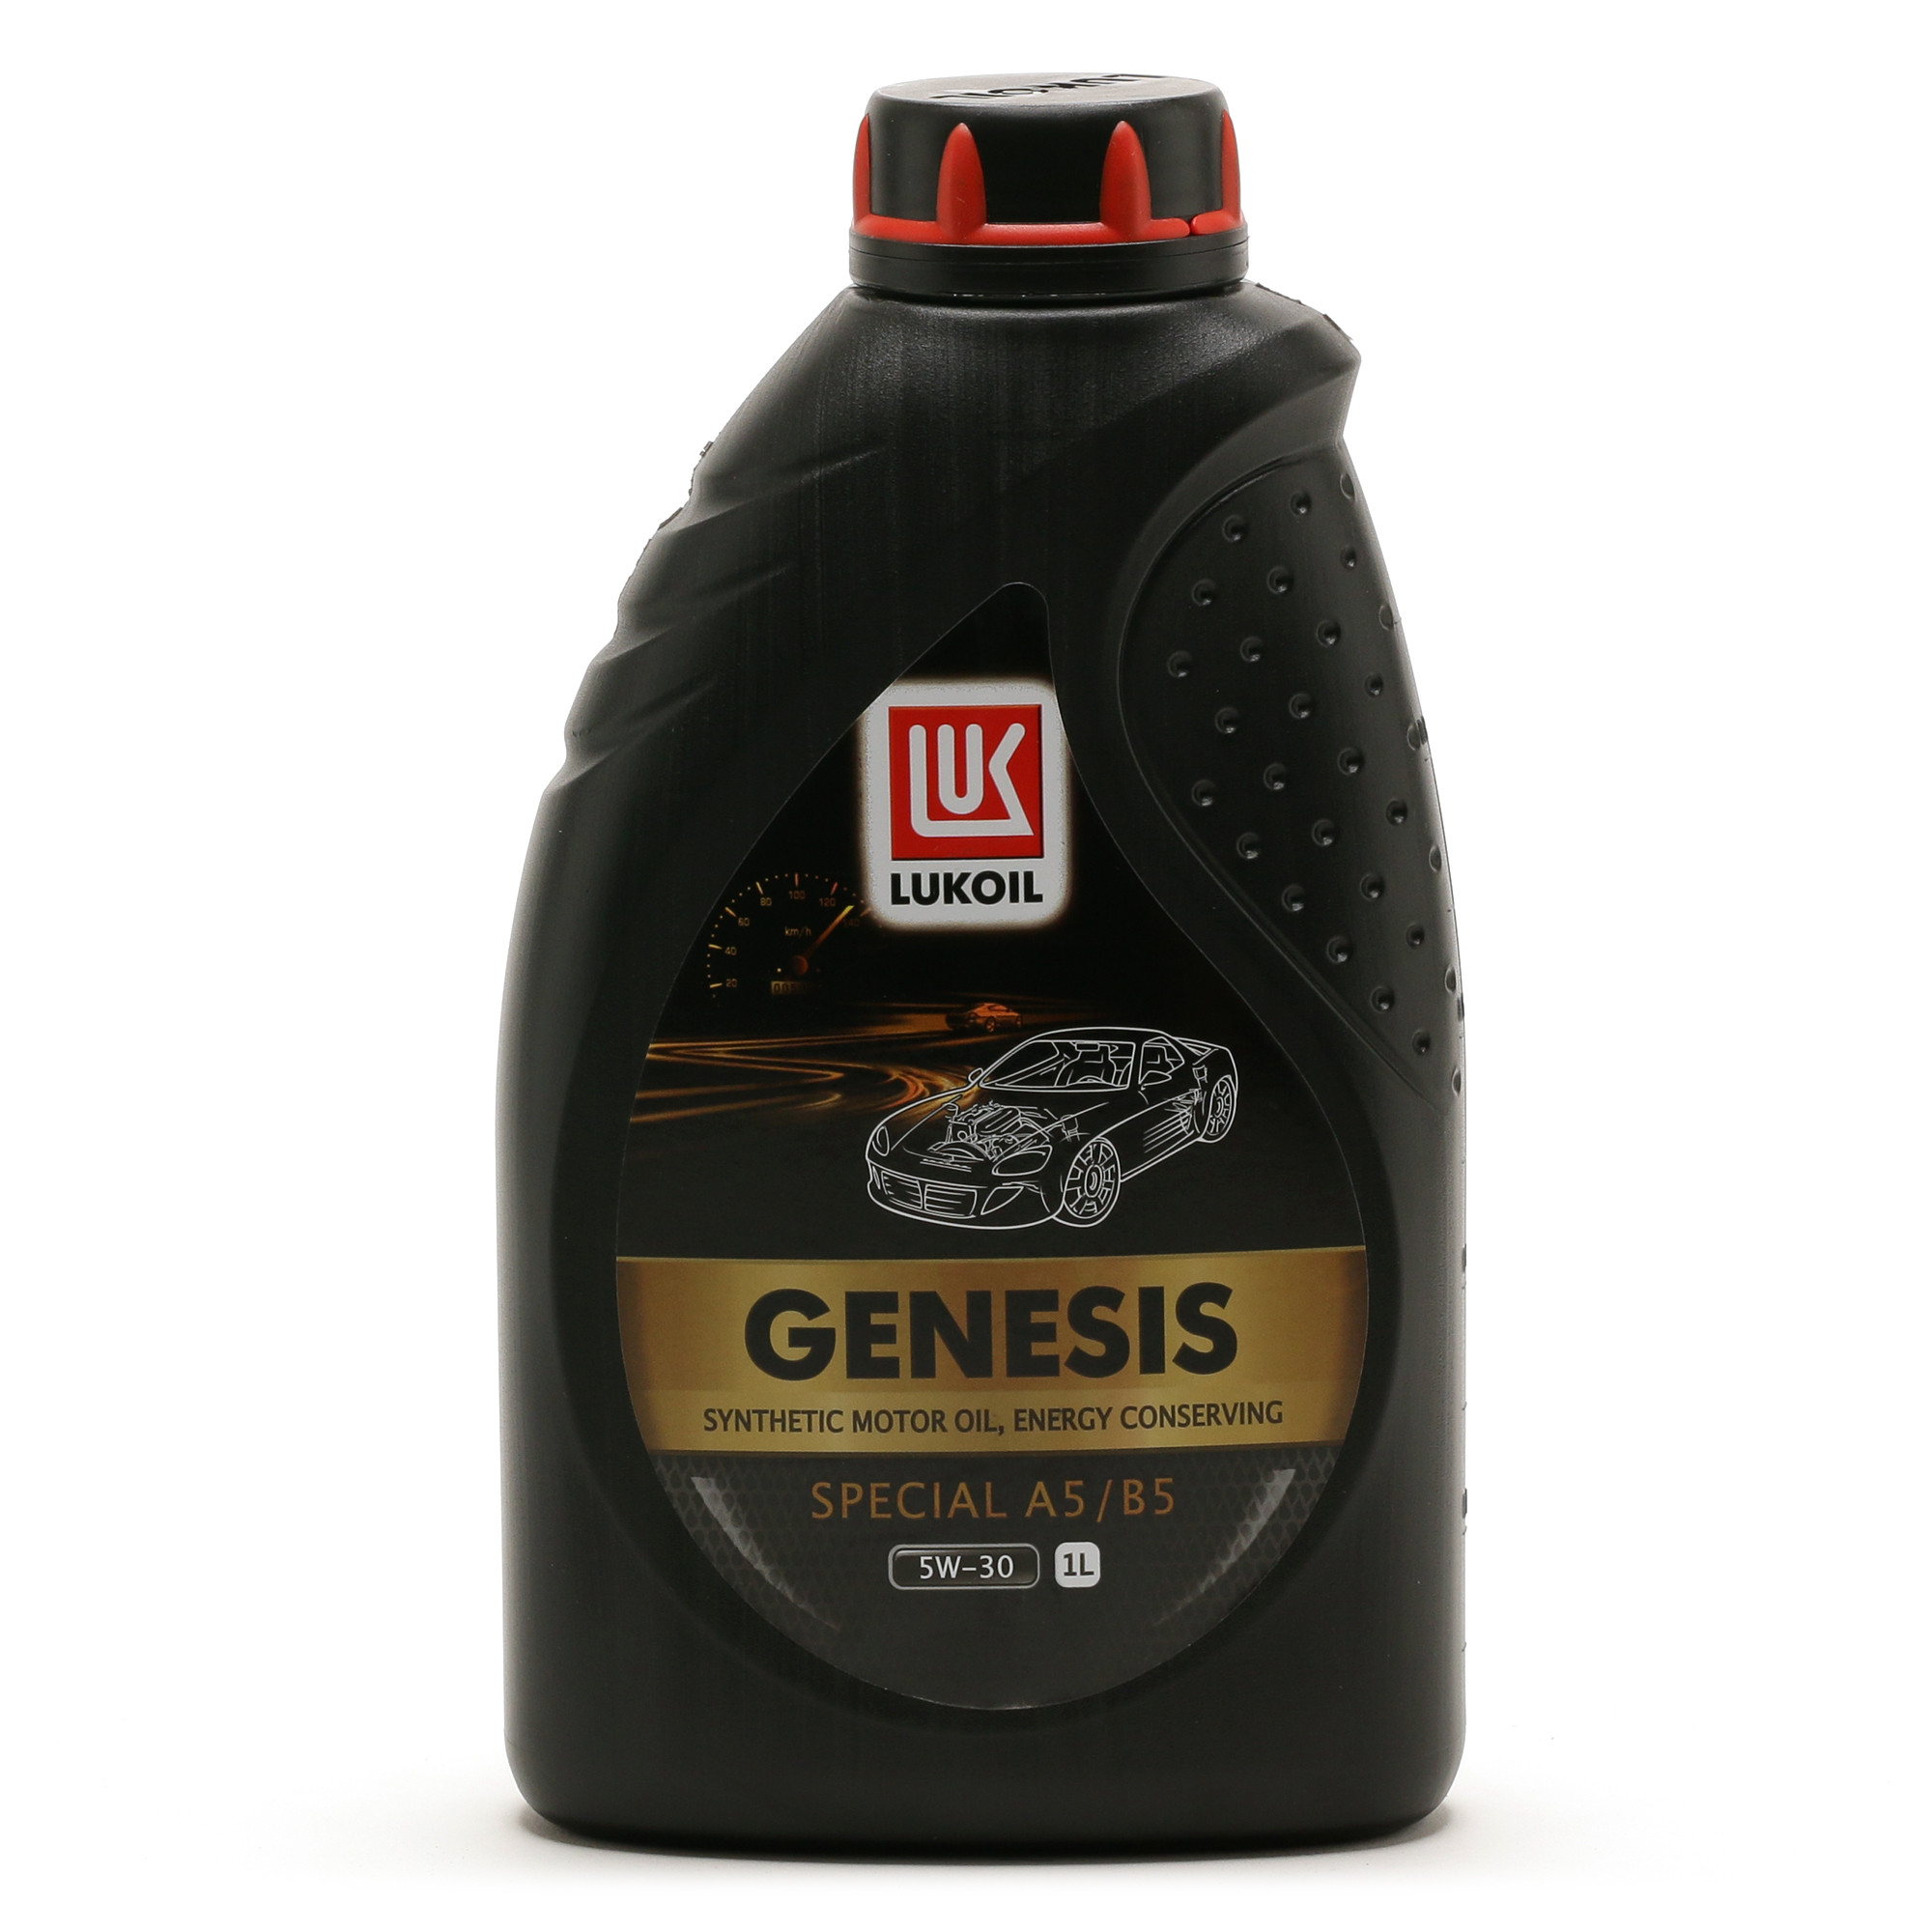 Lukoil genesis special. Lukoil Genesis Special vn 5w-30. Масло Лукойл Genesis Special vn 5w30. Genesis Special vn 5w-30. Лукойл Дженезис спешл vn 5w30.